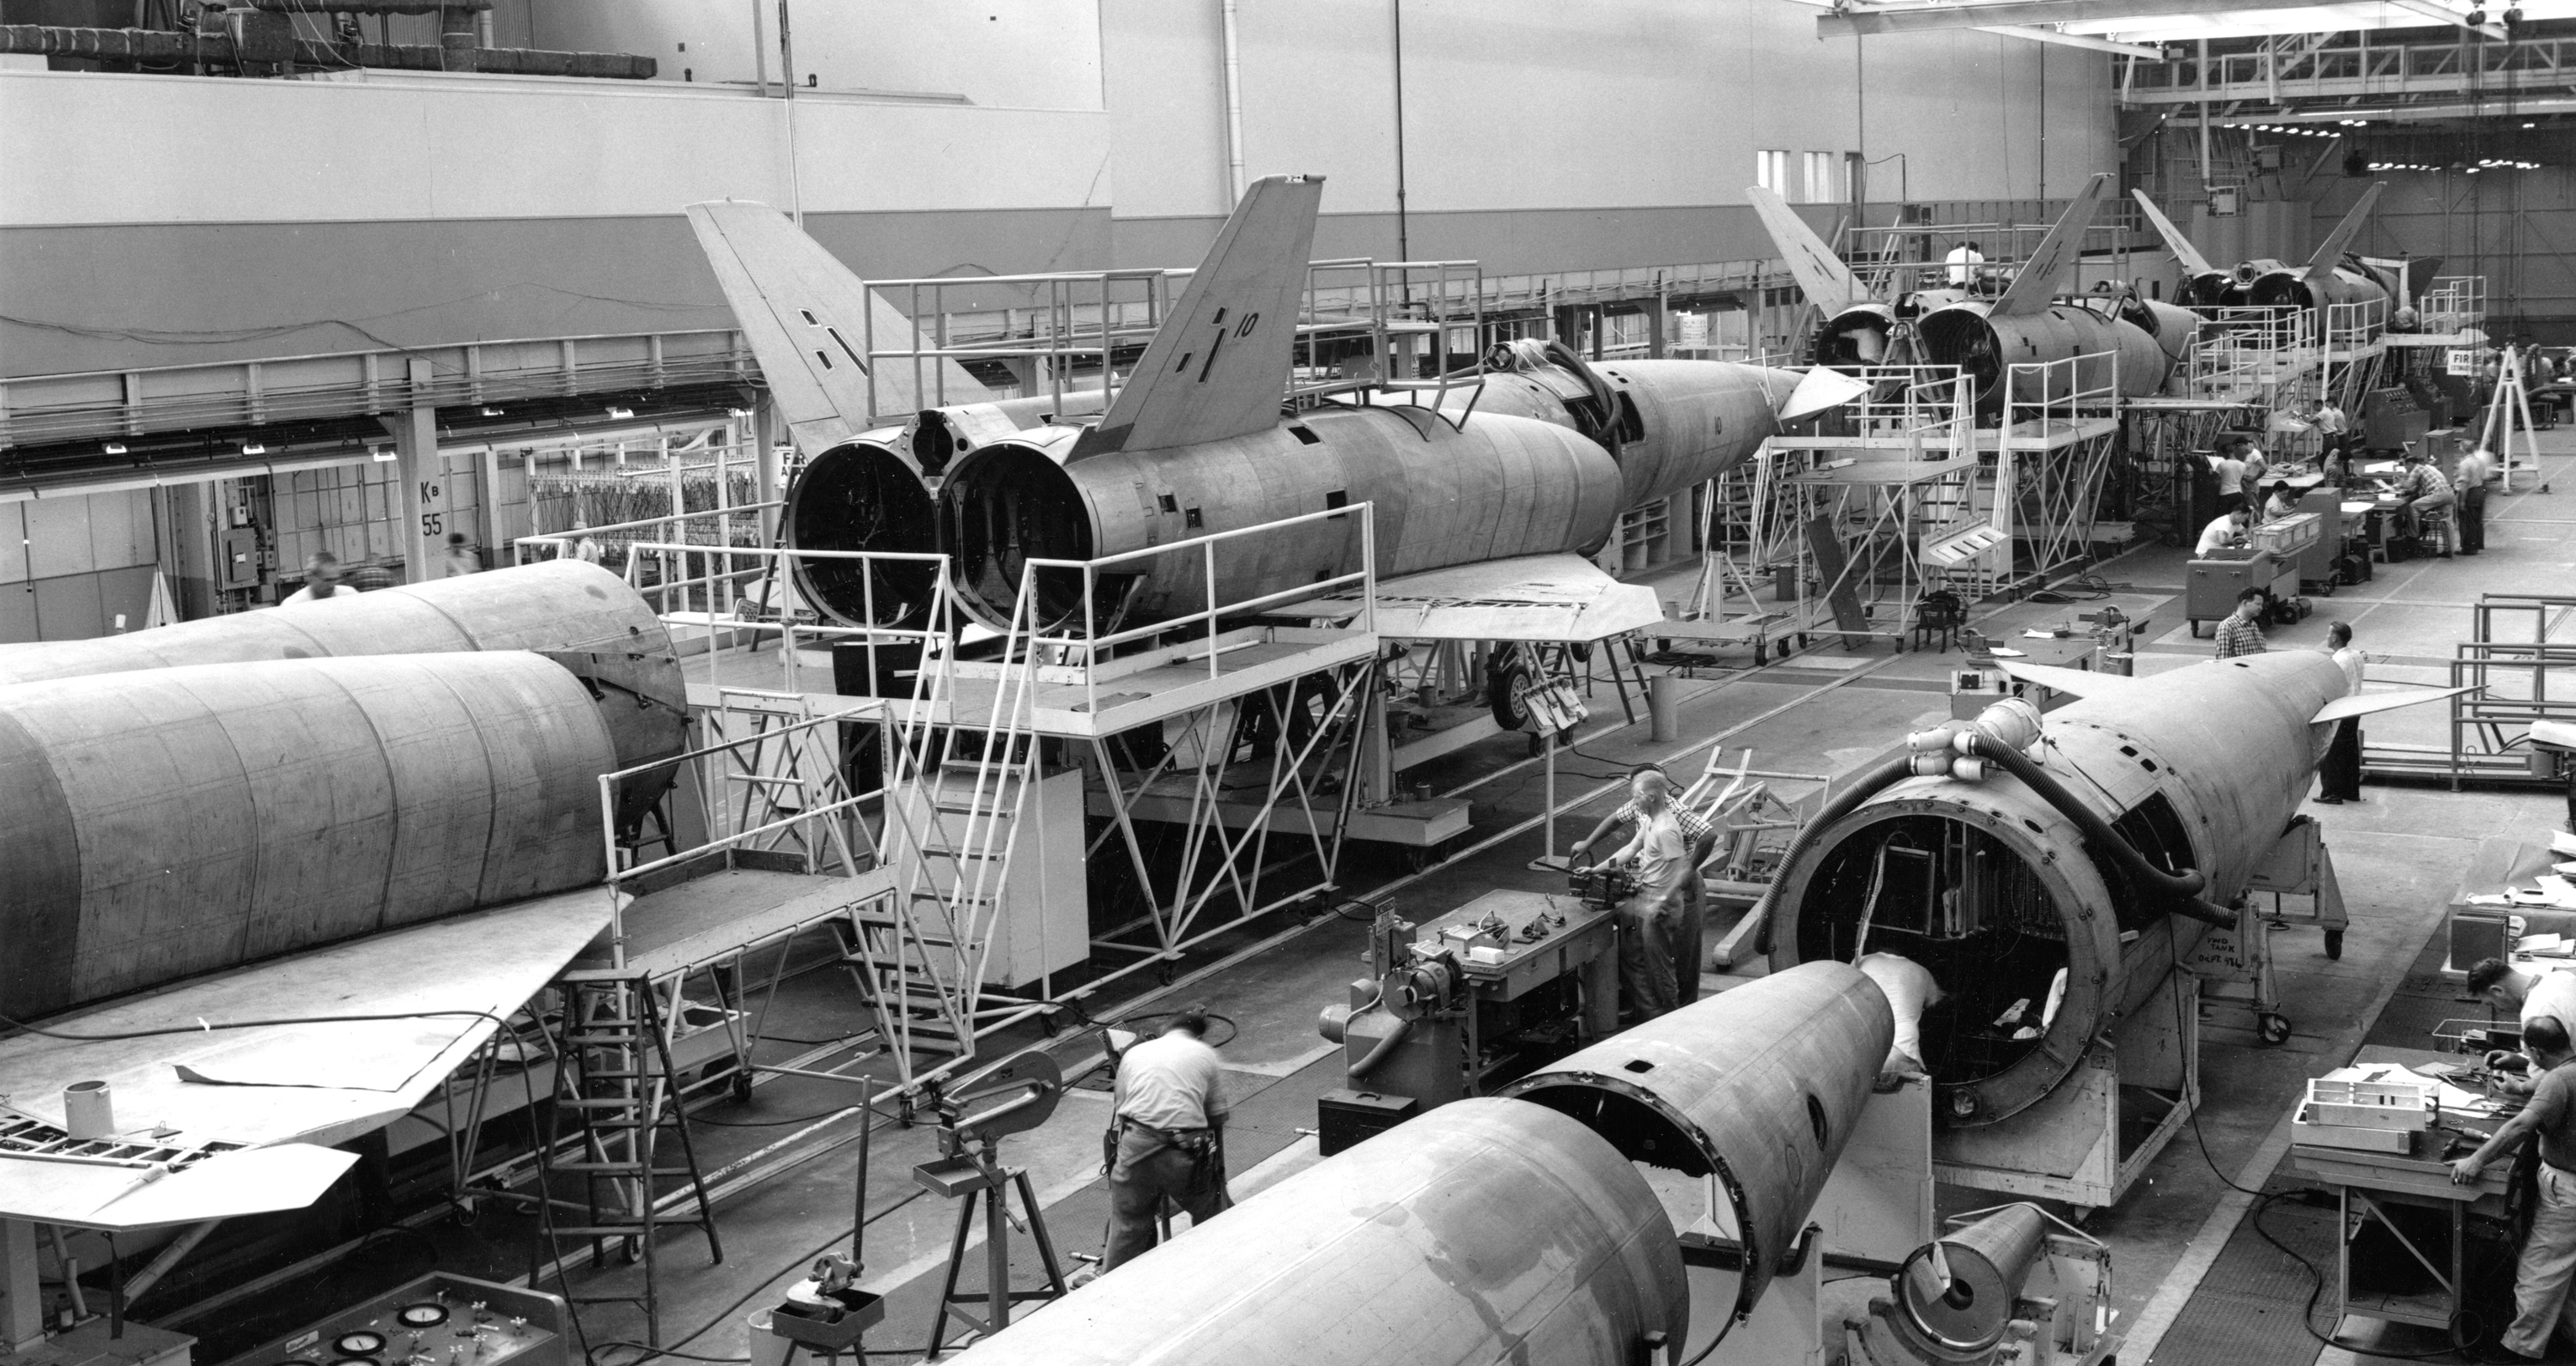 North American Aviation assembled all of the XSM-64 Navaho missiles and boosters at their facility in Downey, California.